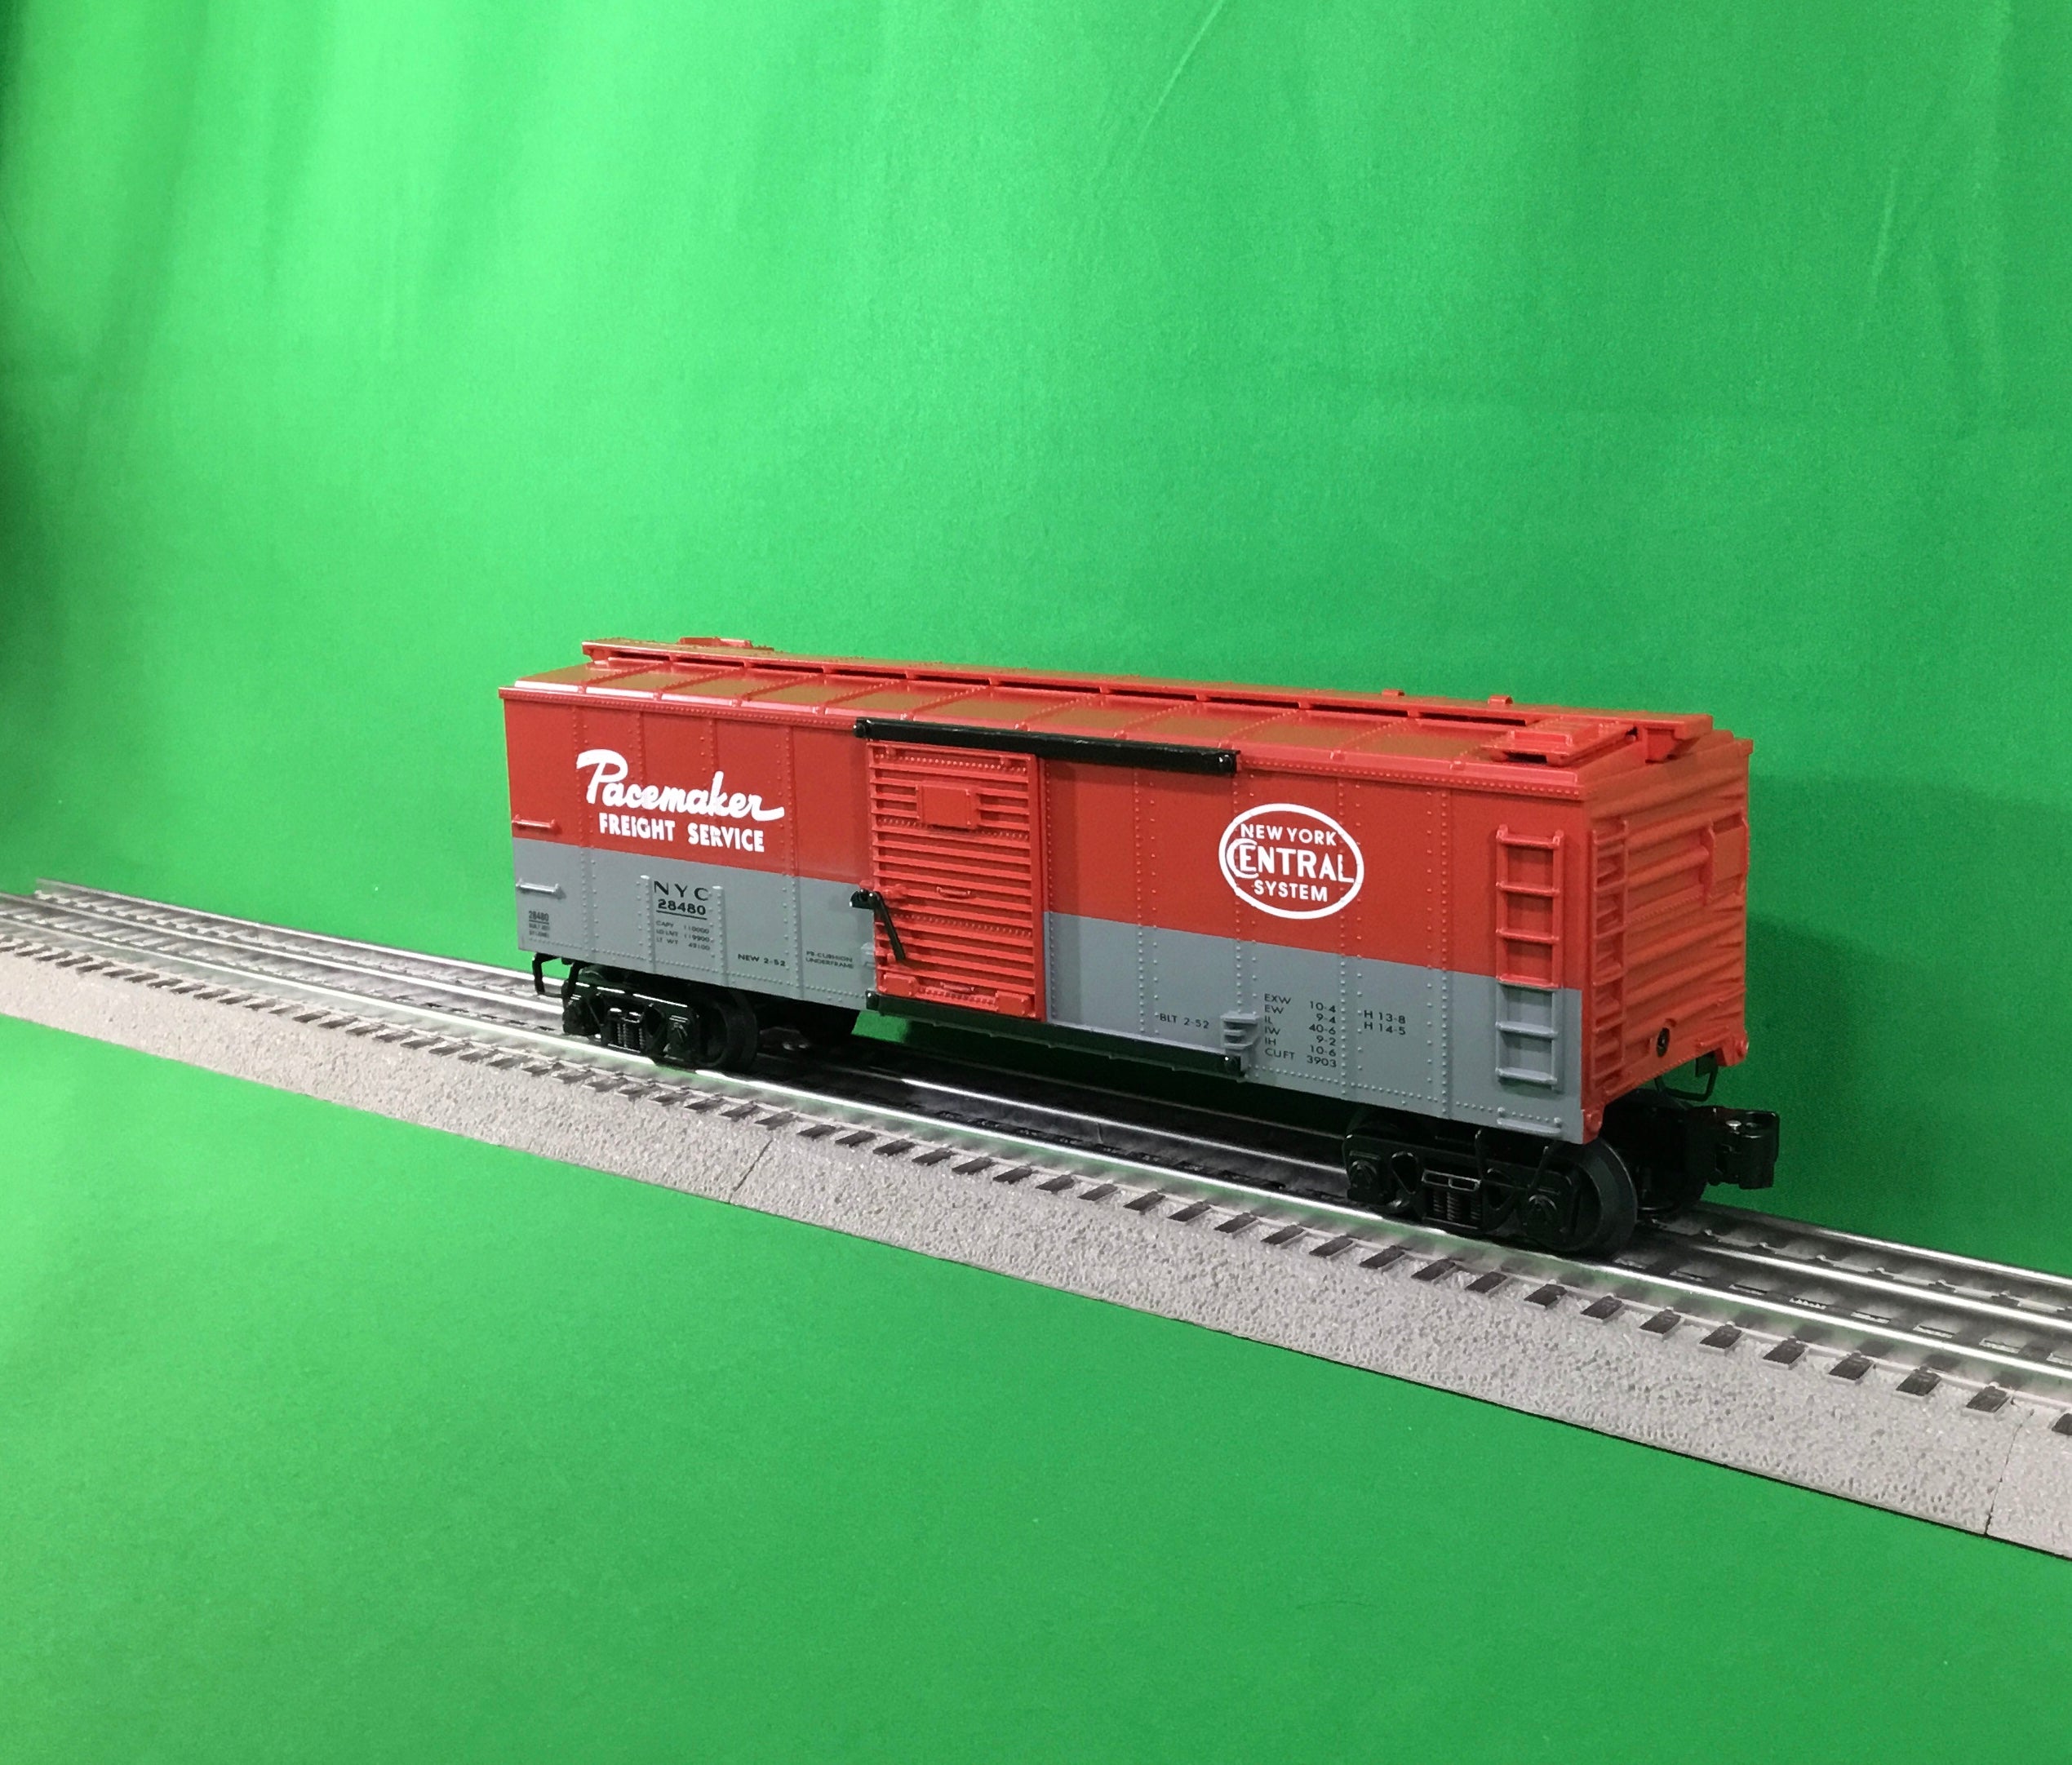 Lionel 2328480 - Merchandise Boxcar "New York Central" (Pacemaker)